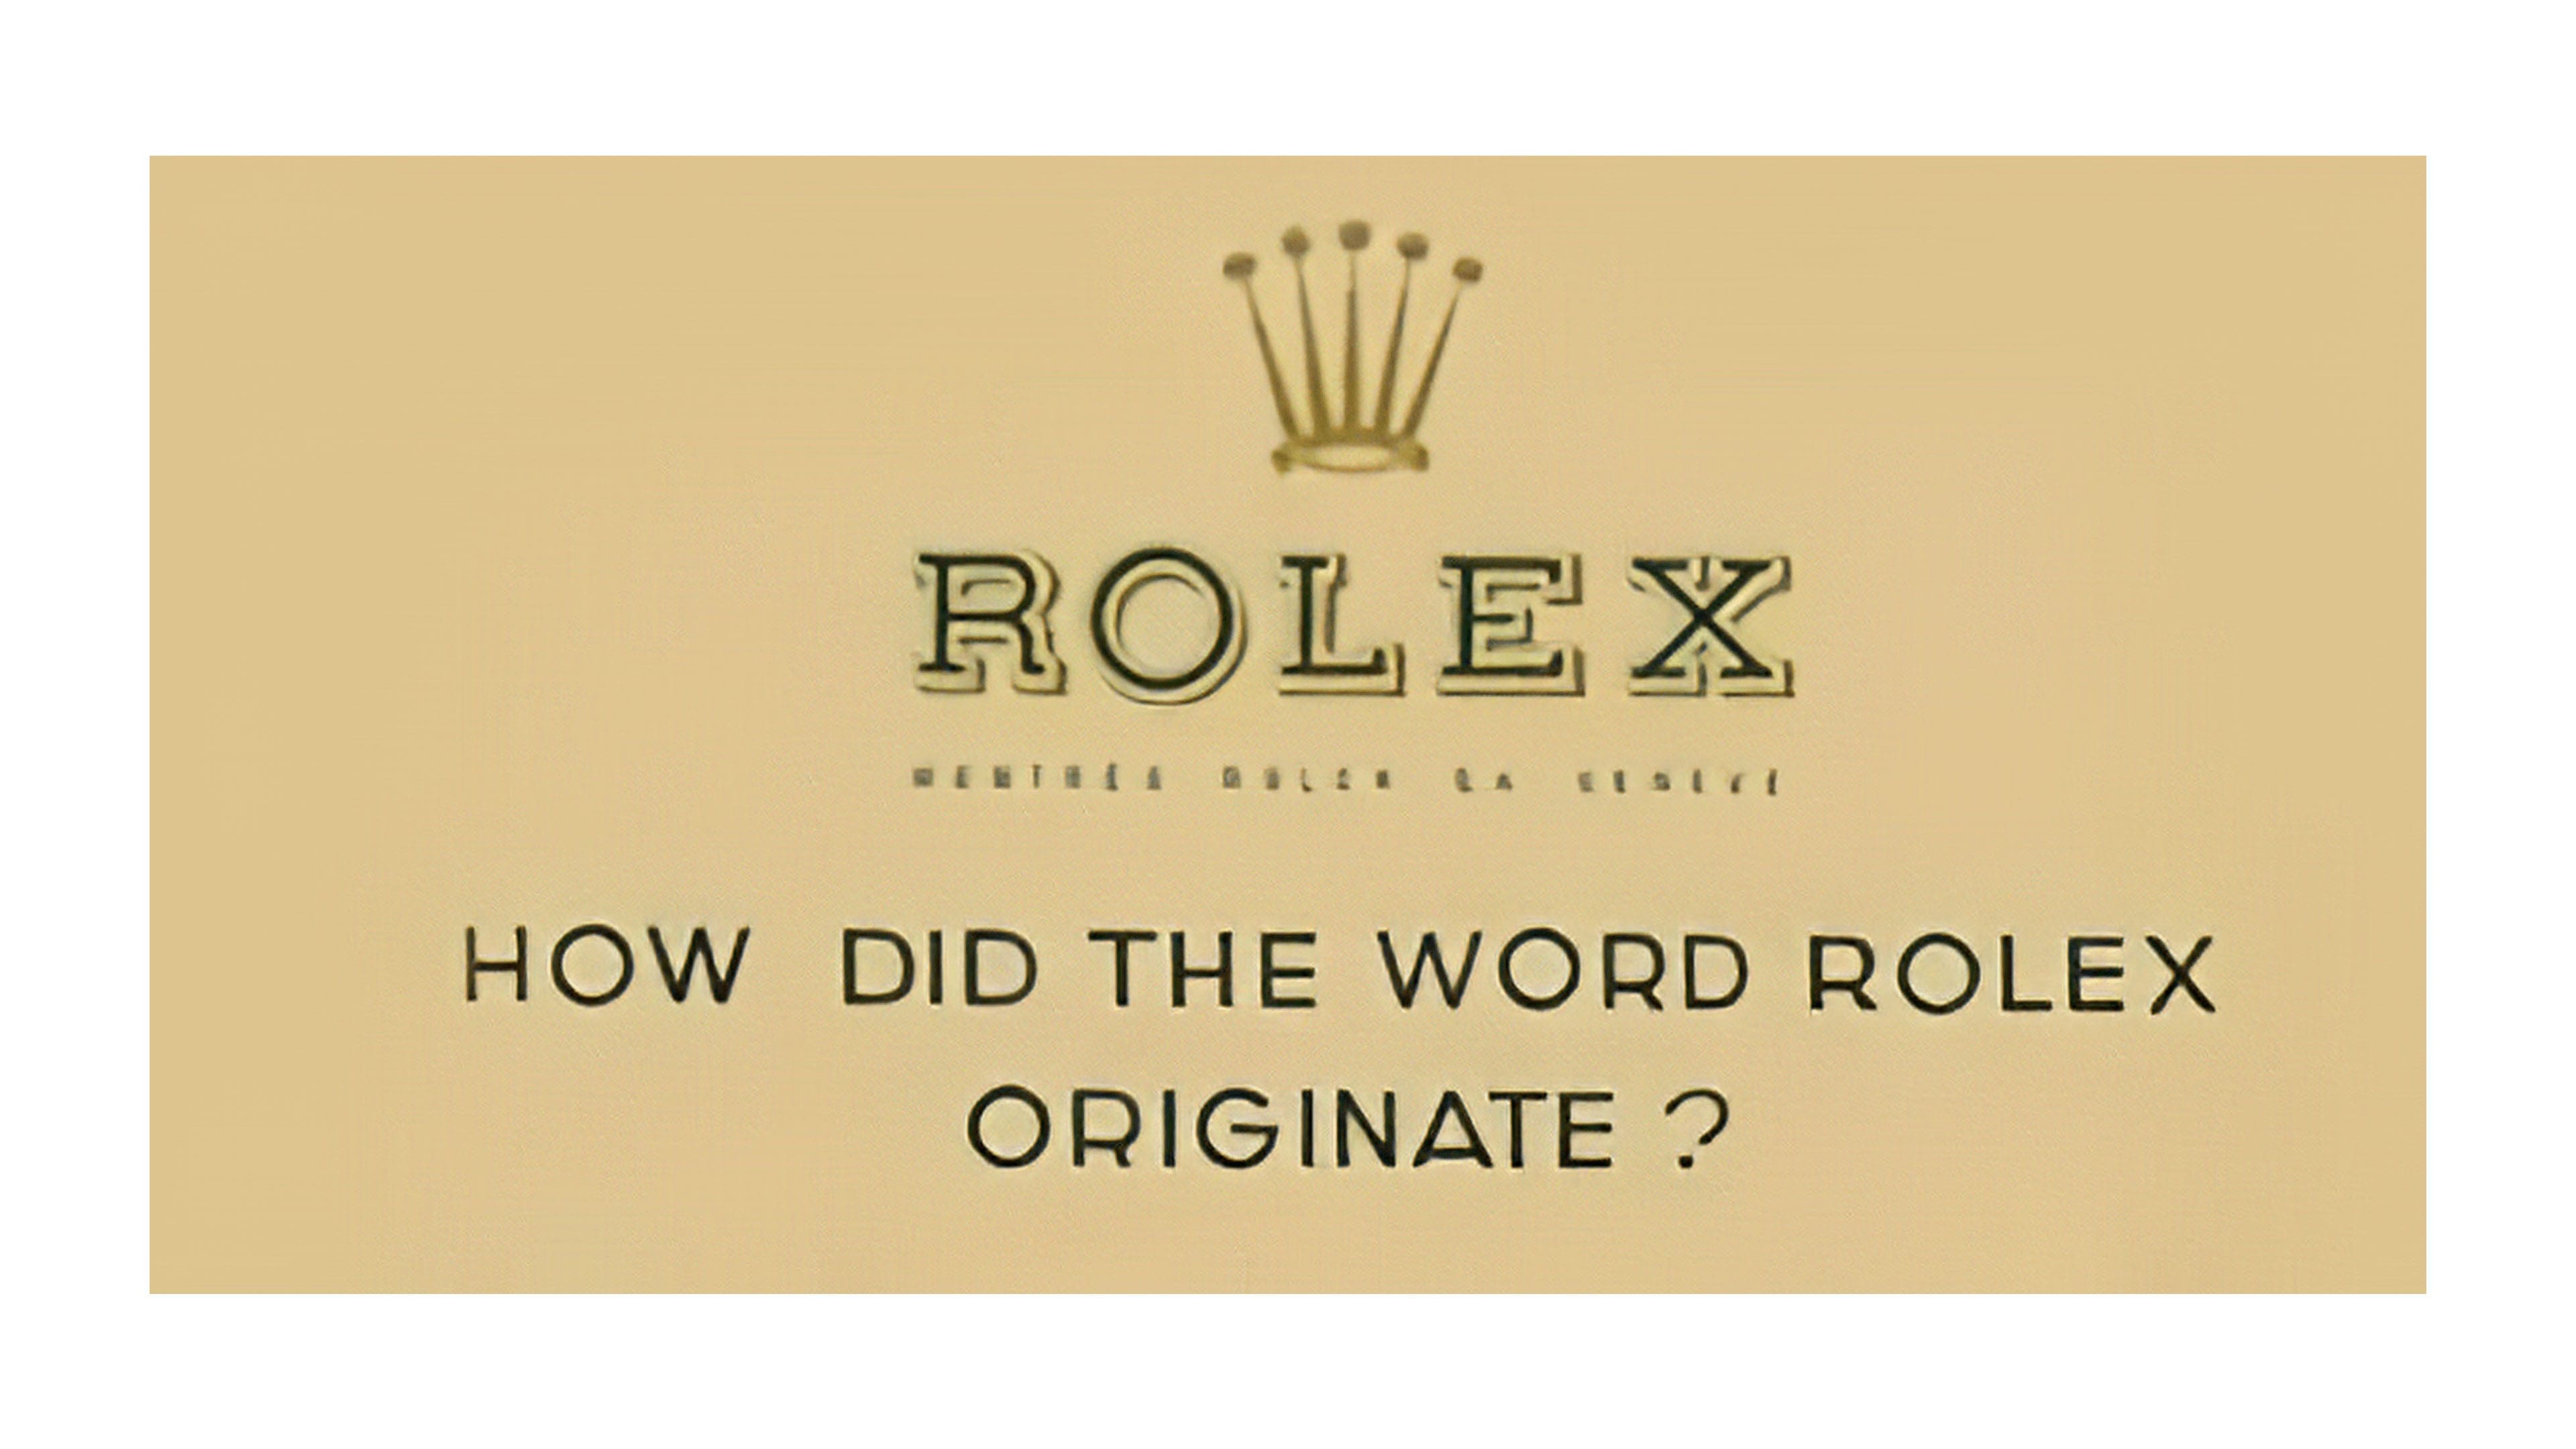 Rolex Logo The Most Famous Brands And Company Logos In The World